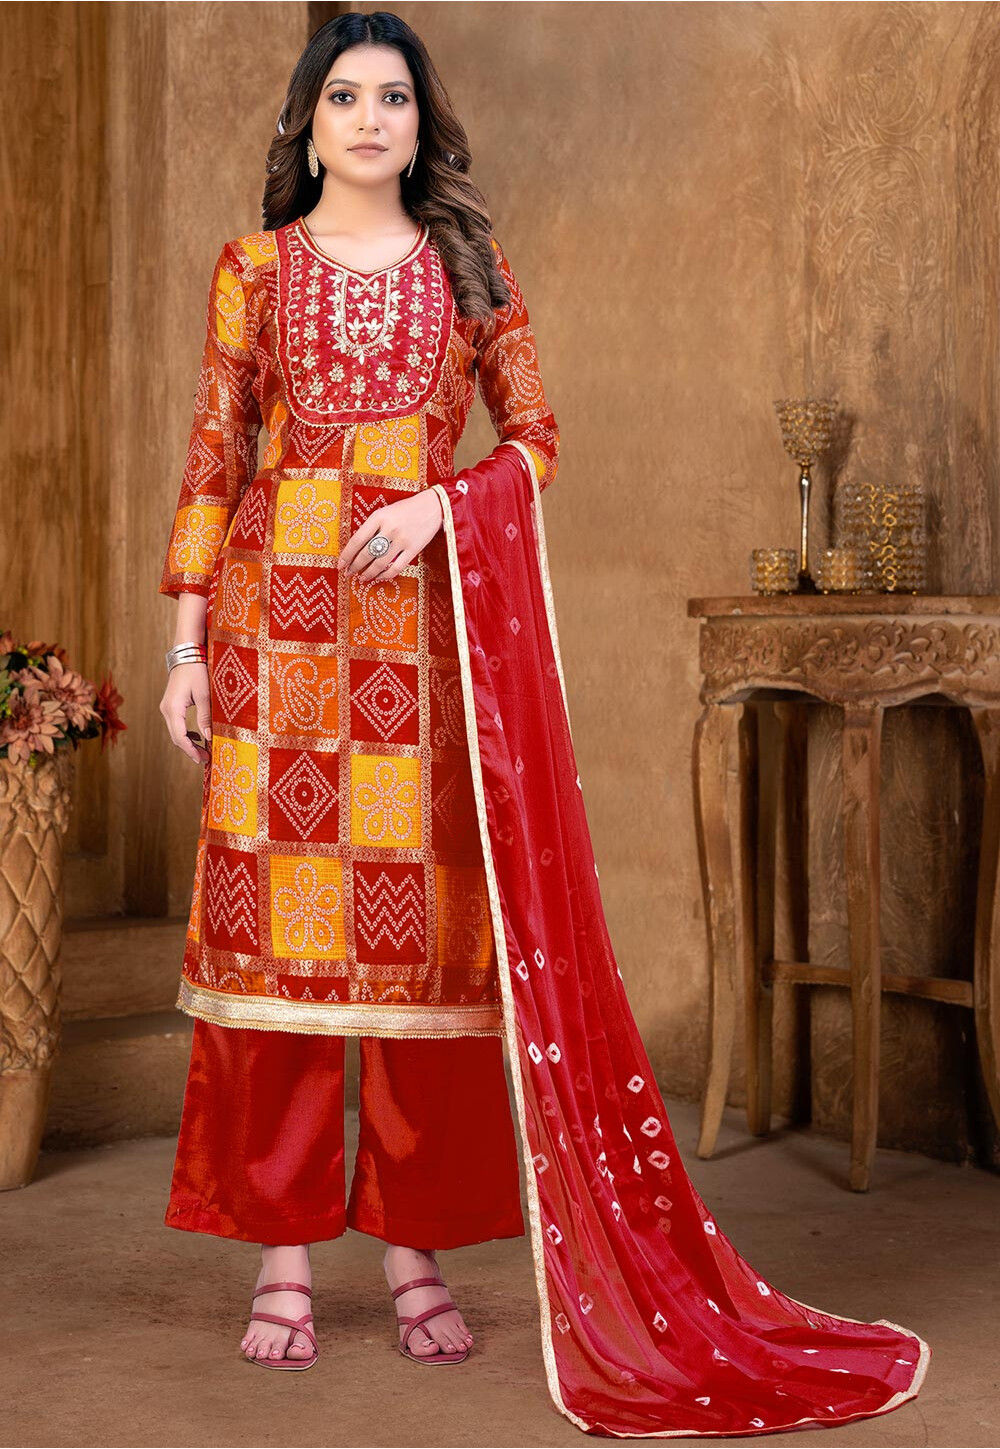 An Exquisite Must Have Salwar Suit - Rana's by Kshitija